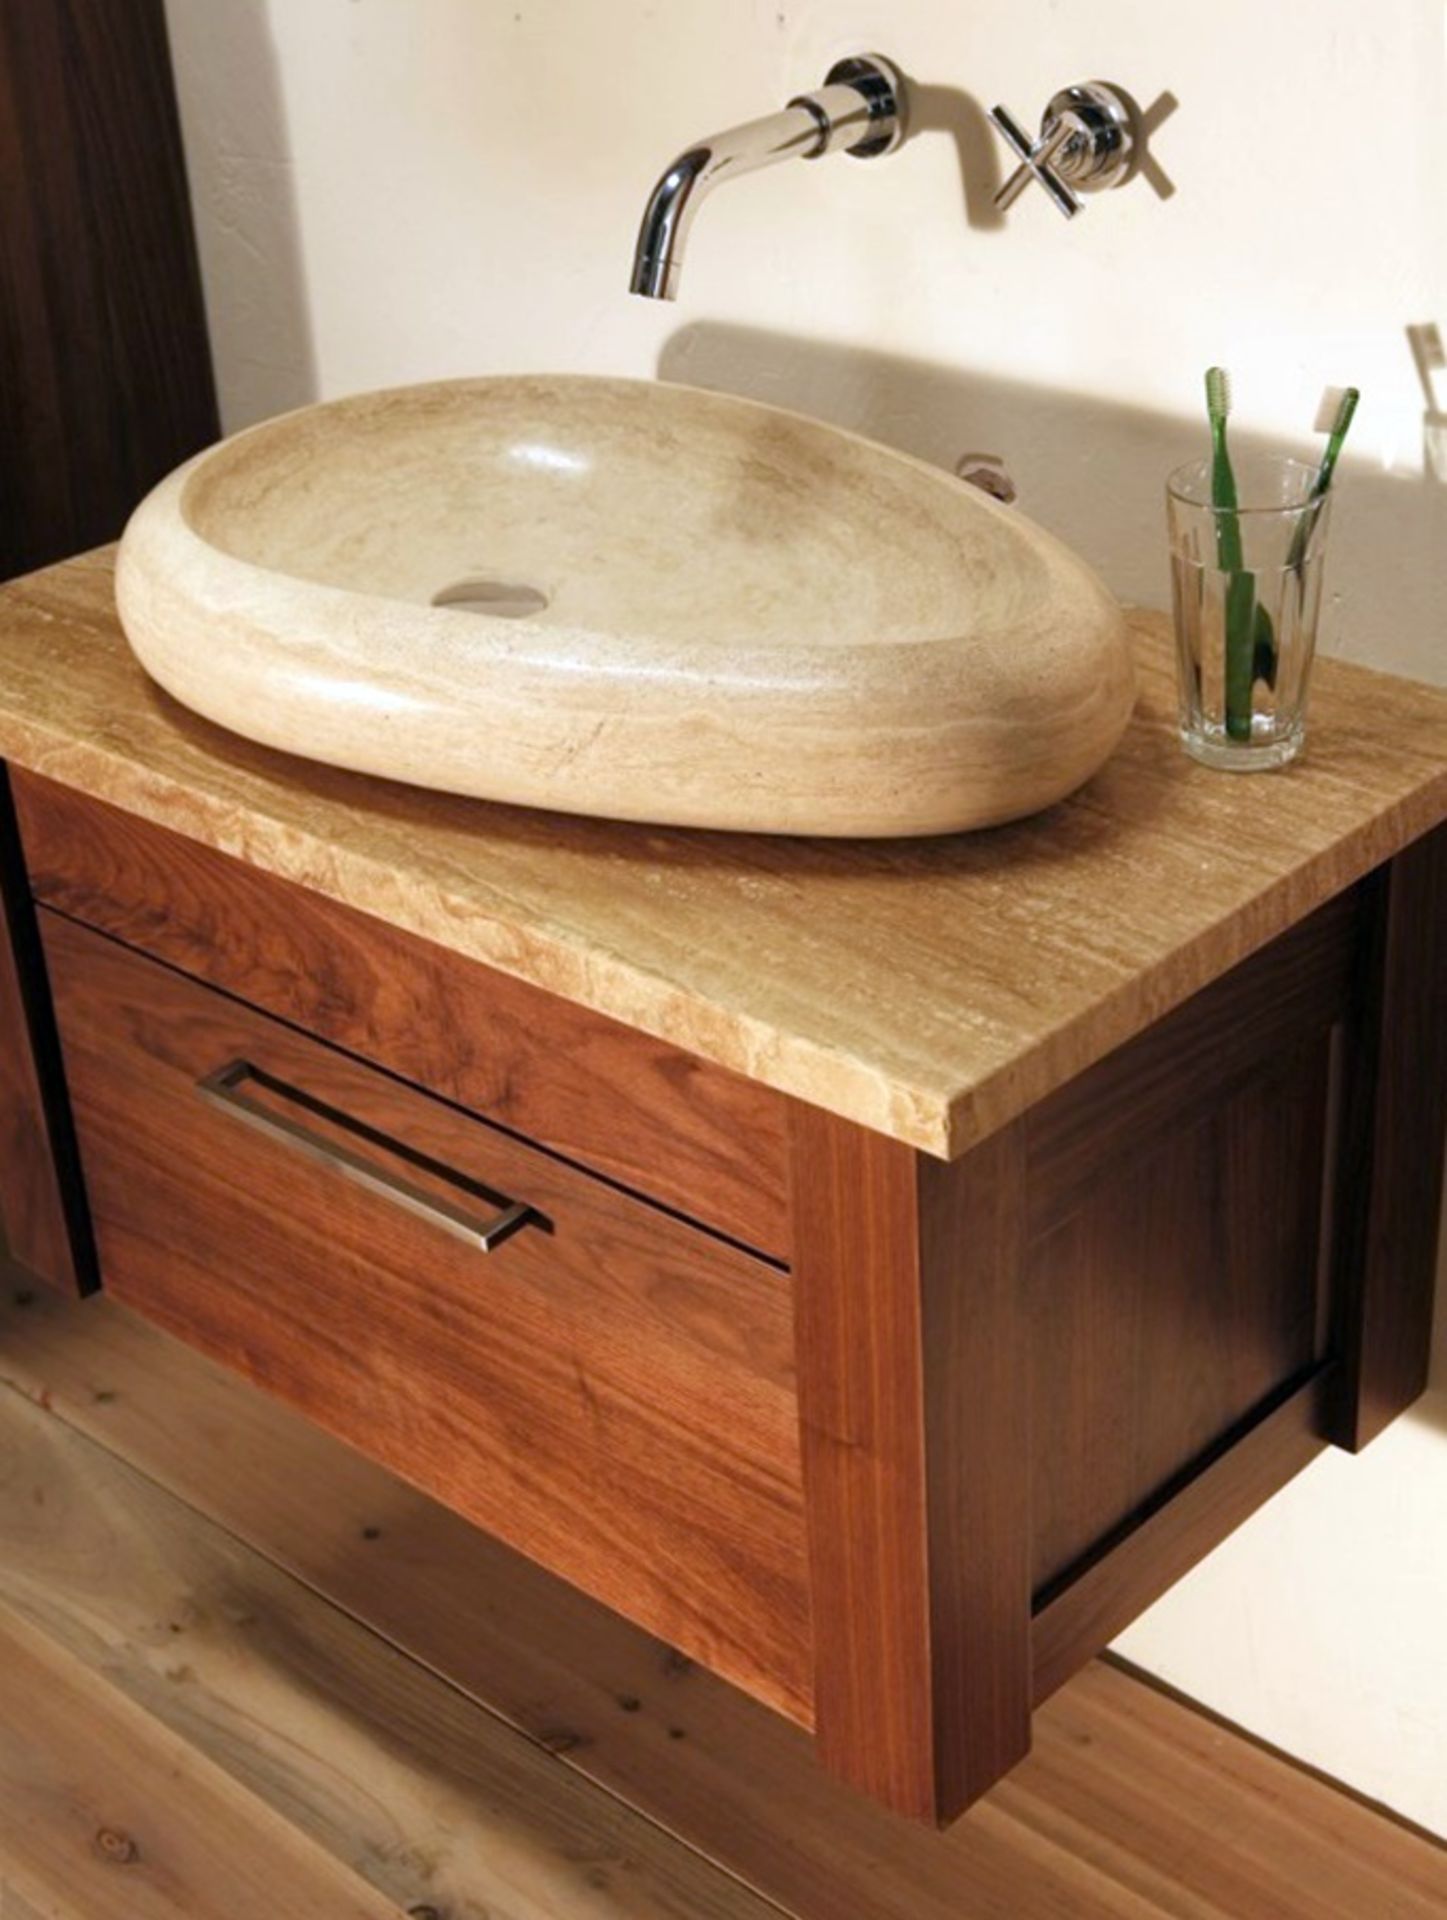 1 x Stonearth 'Pebble' Beige Travertine Stone Countertop Sink Basin - New Boxed Stock - RRP £560 - Image 2 of 3